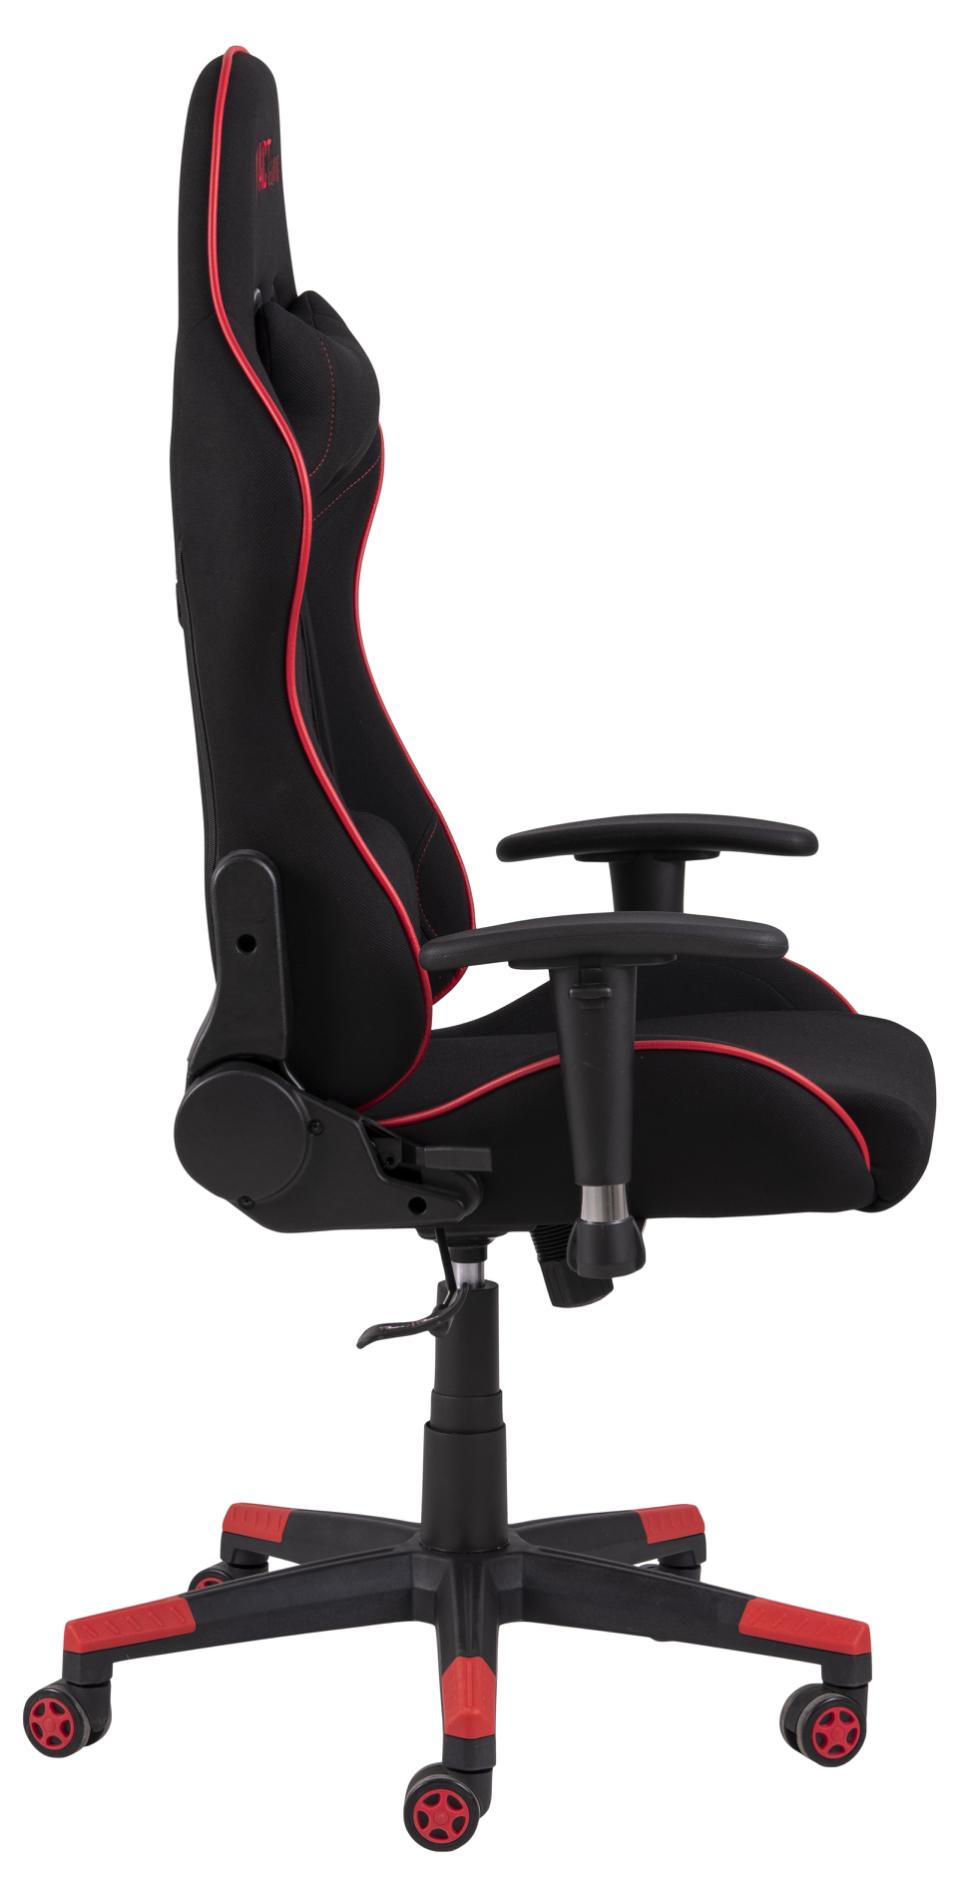 ACT™ SX Gaming-Stuhl / ENERGY Red